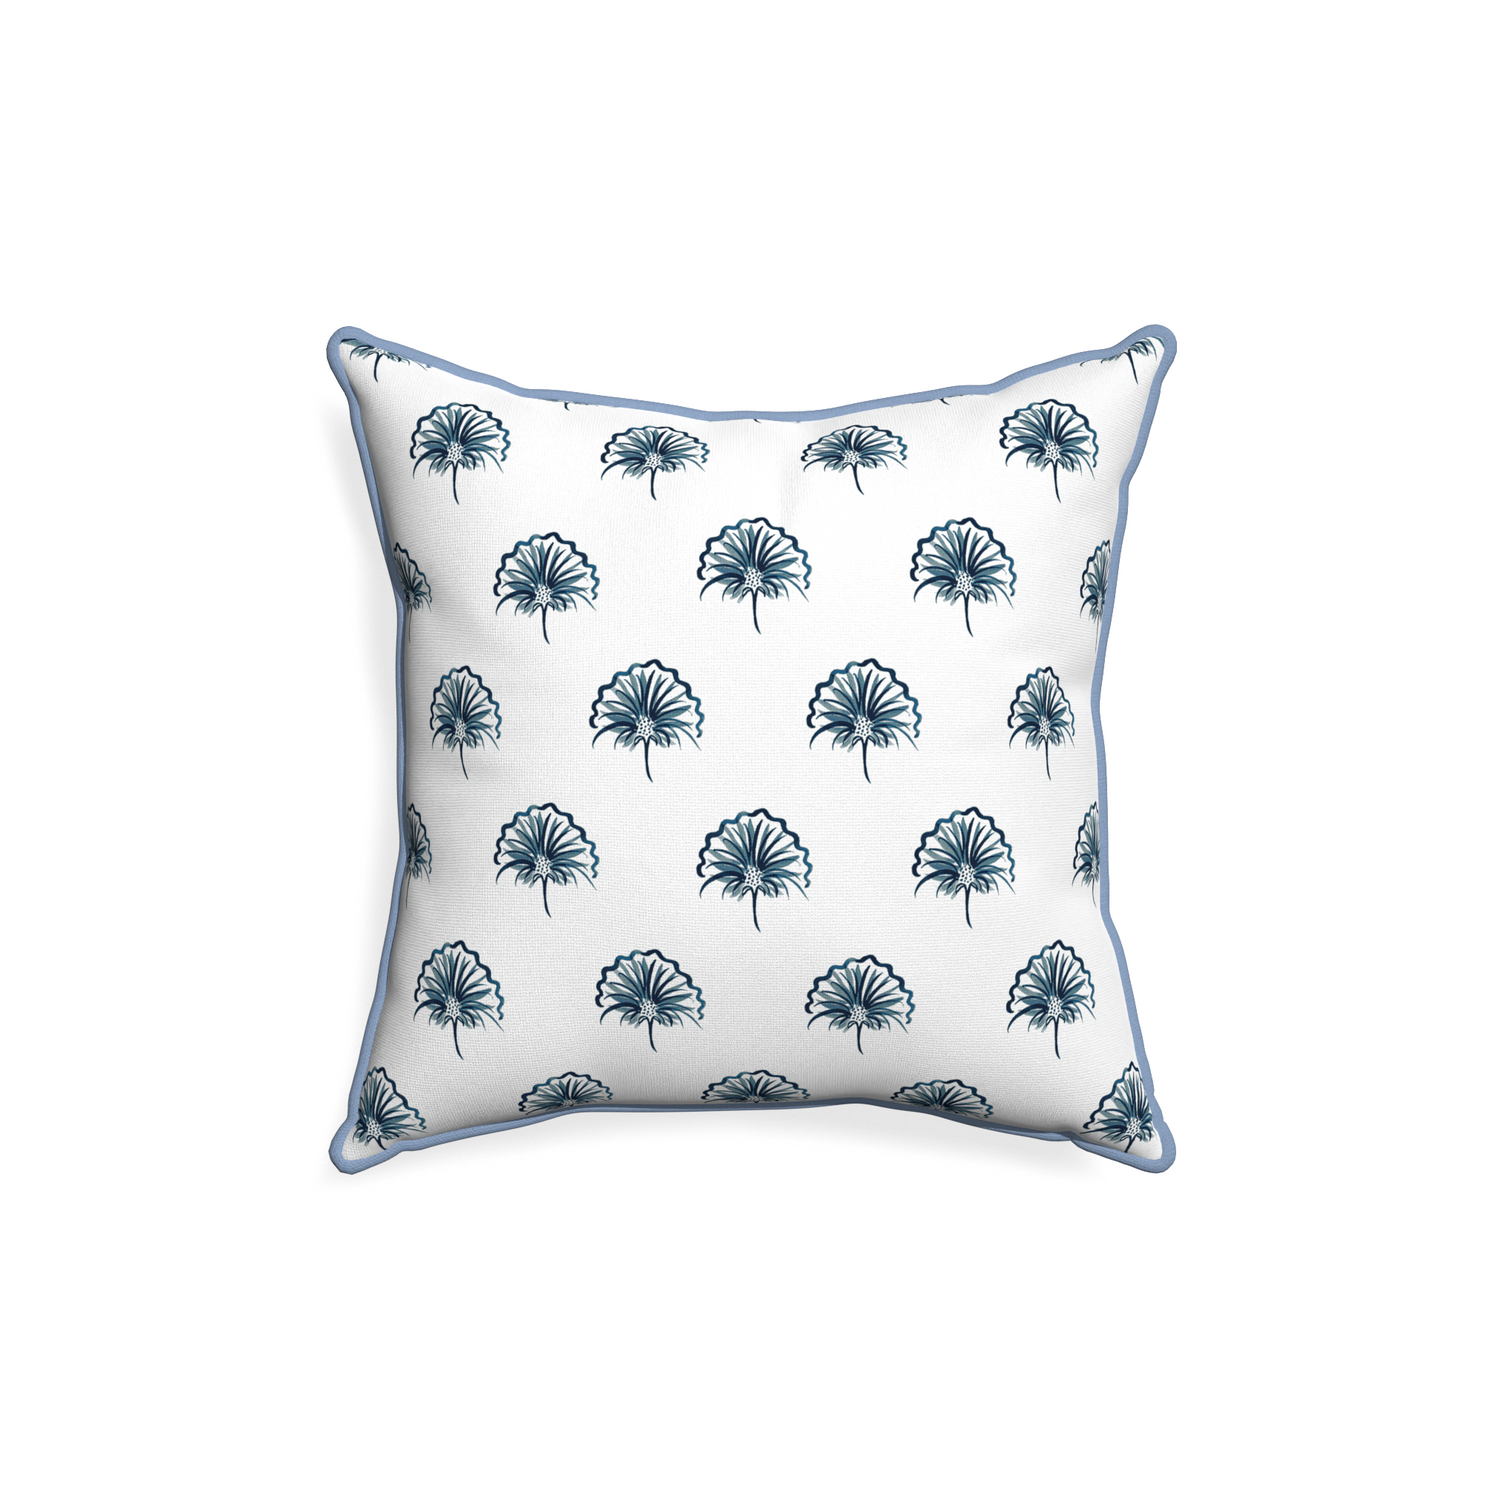 18-square penelope midnight custom floral navypillow with sky piping on white background